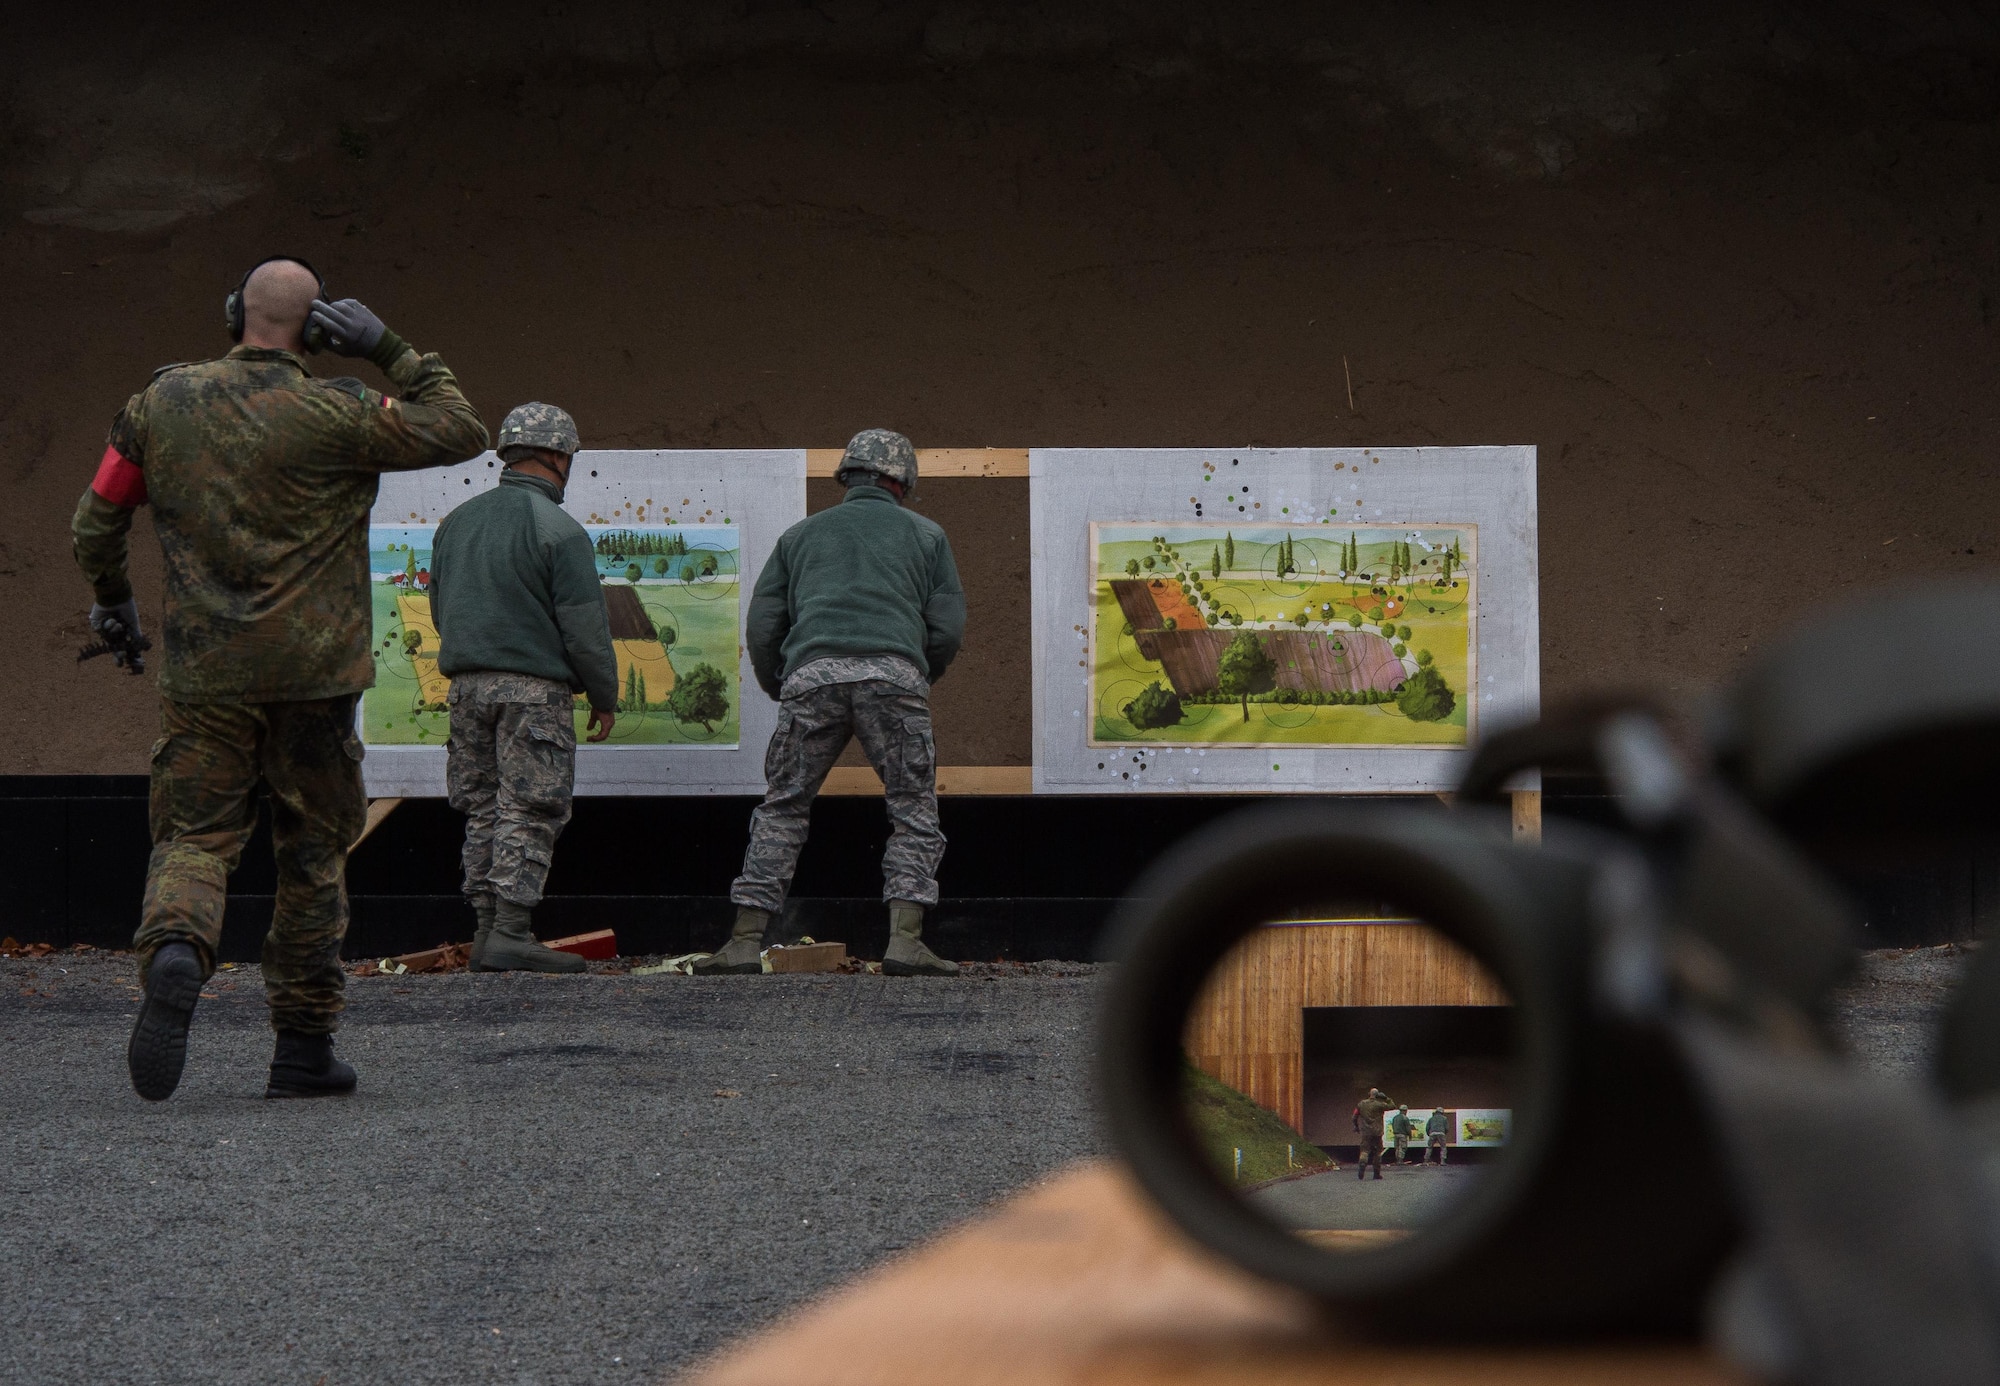 Members of the 86th Security Forces Squadron adjust targets in preparation for the next round of shooting Nov. 18, 2015, at Zweibruecken, Germany. Members of the 86th SFS shot the P8 pistol, G36 assault rifle and MG3 machine gun to earn the Bundeswehr (German army) marksmanship badge for weapons proficiency. (U.S. Air Force photo/Senior Airman Damon Kasberg)